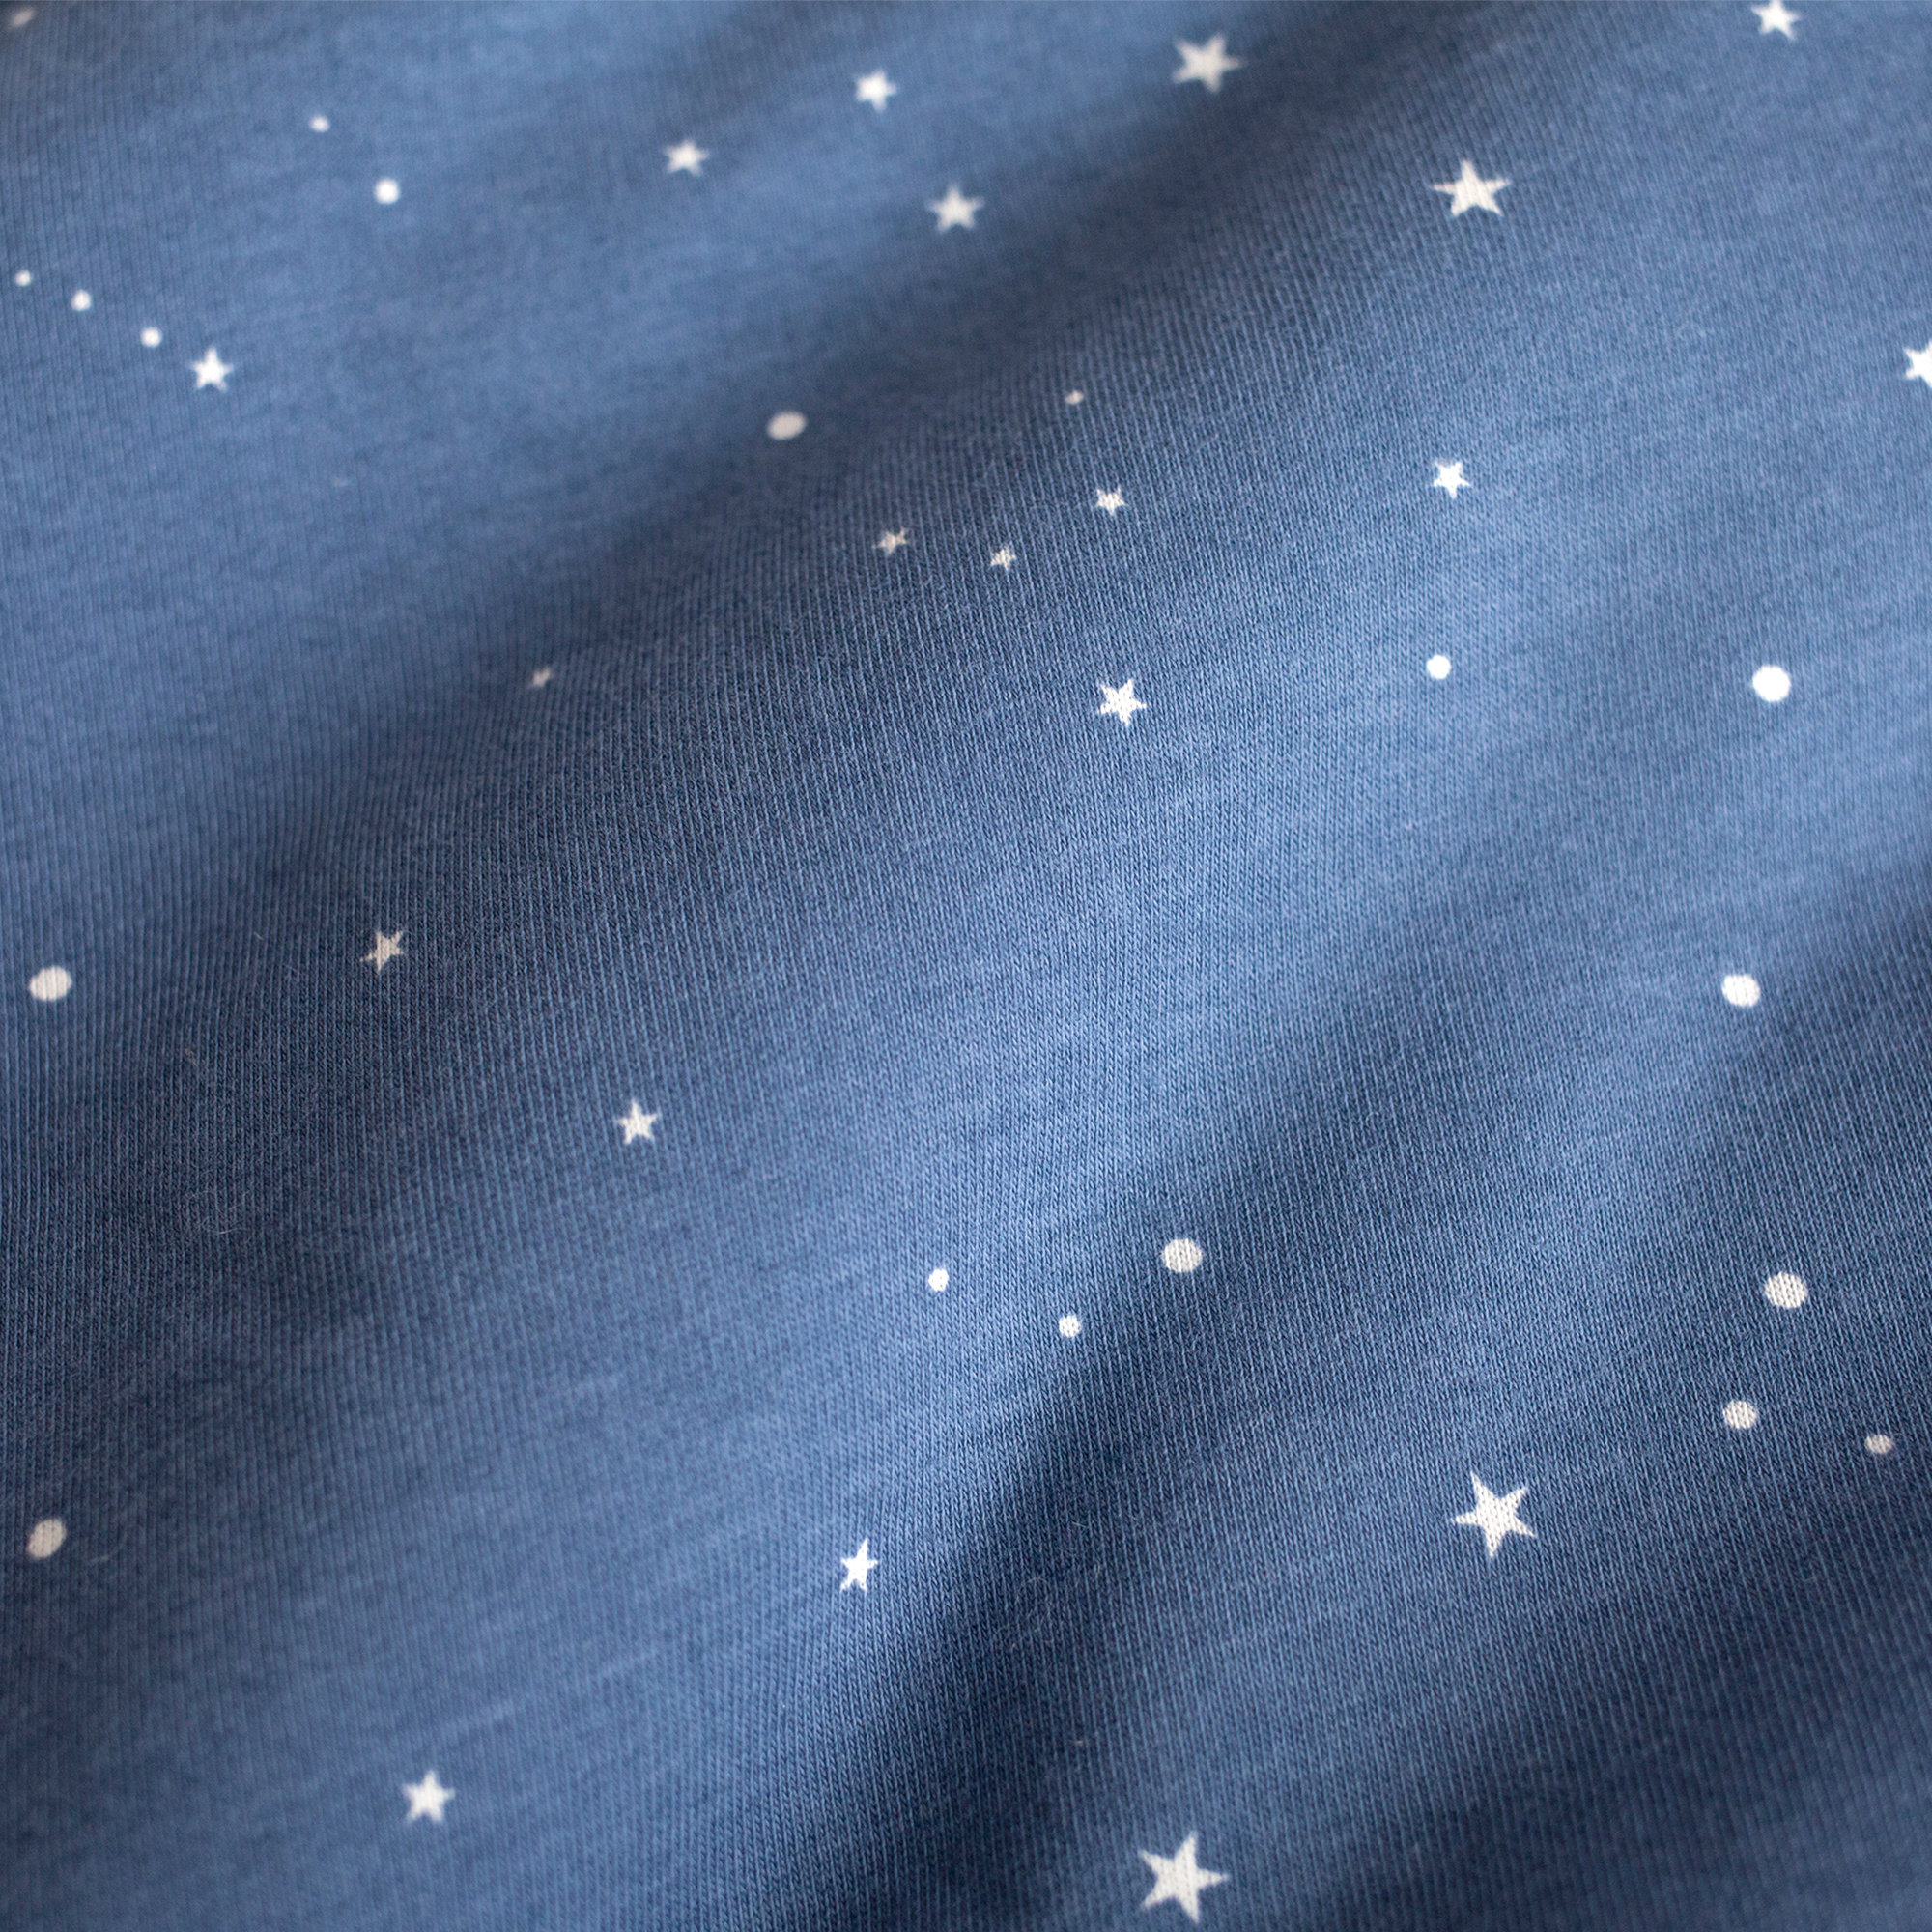 MAGIC BAG Jersey 1-4m STARY Little stars print shade tog 0.5Outlet